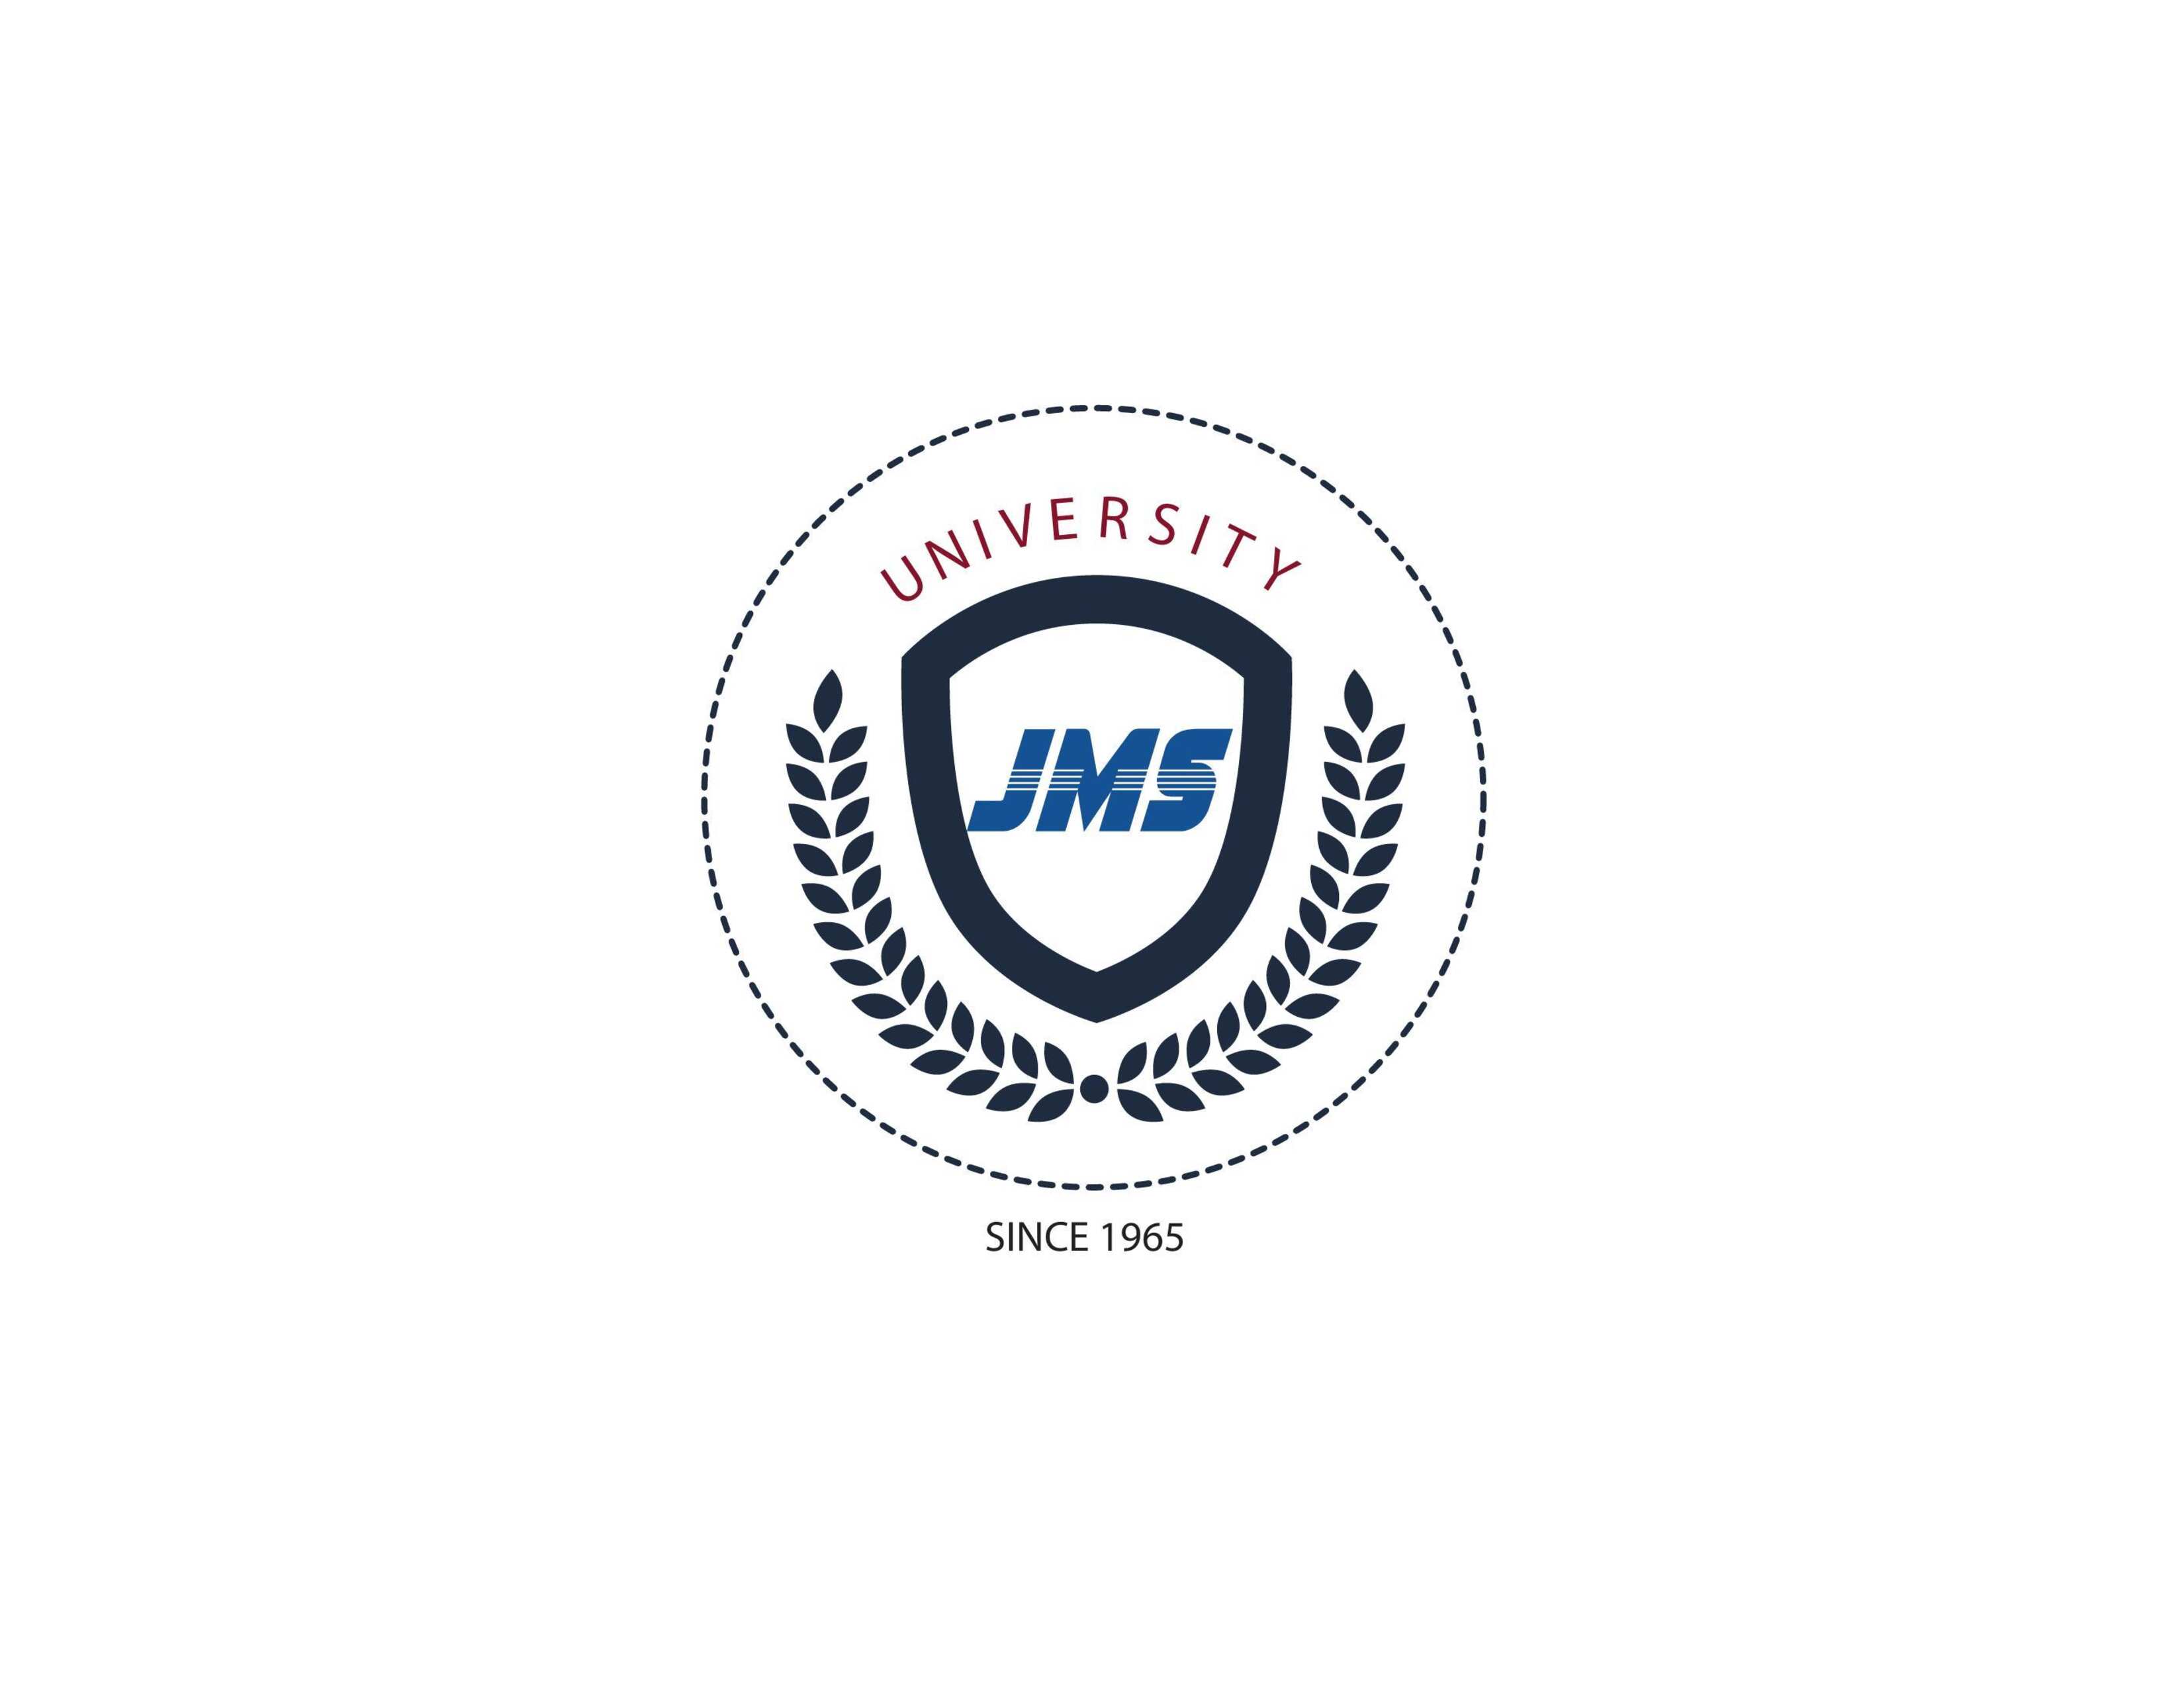 Welcome To JMS University Official